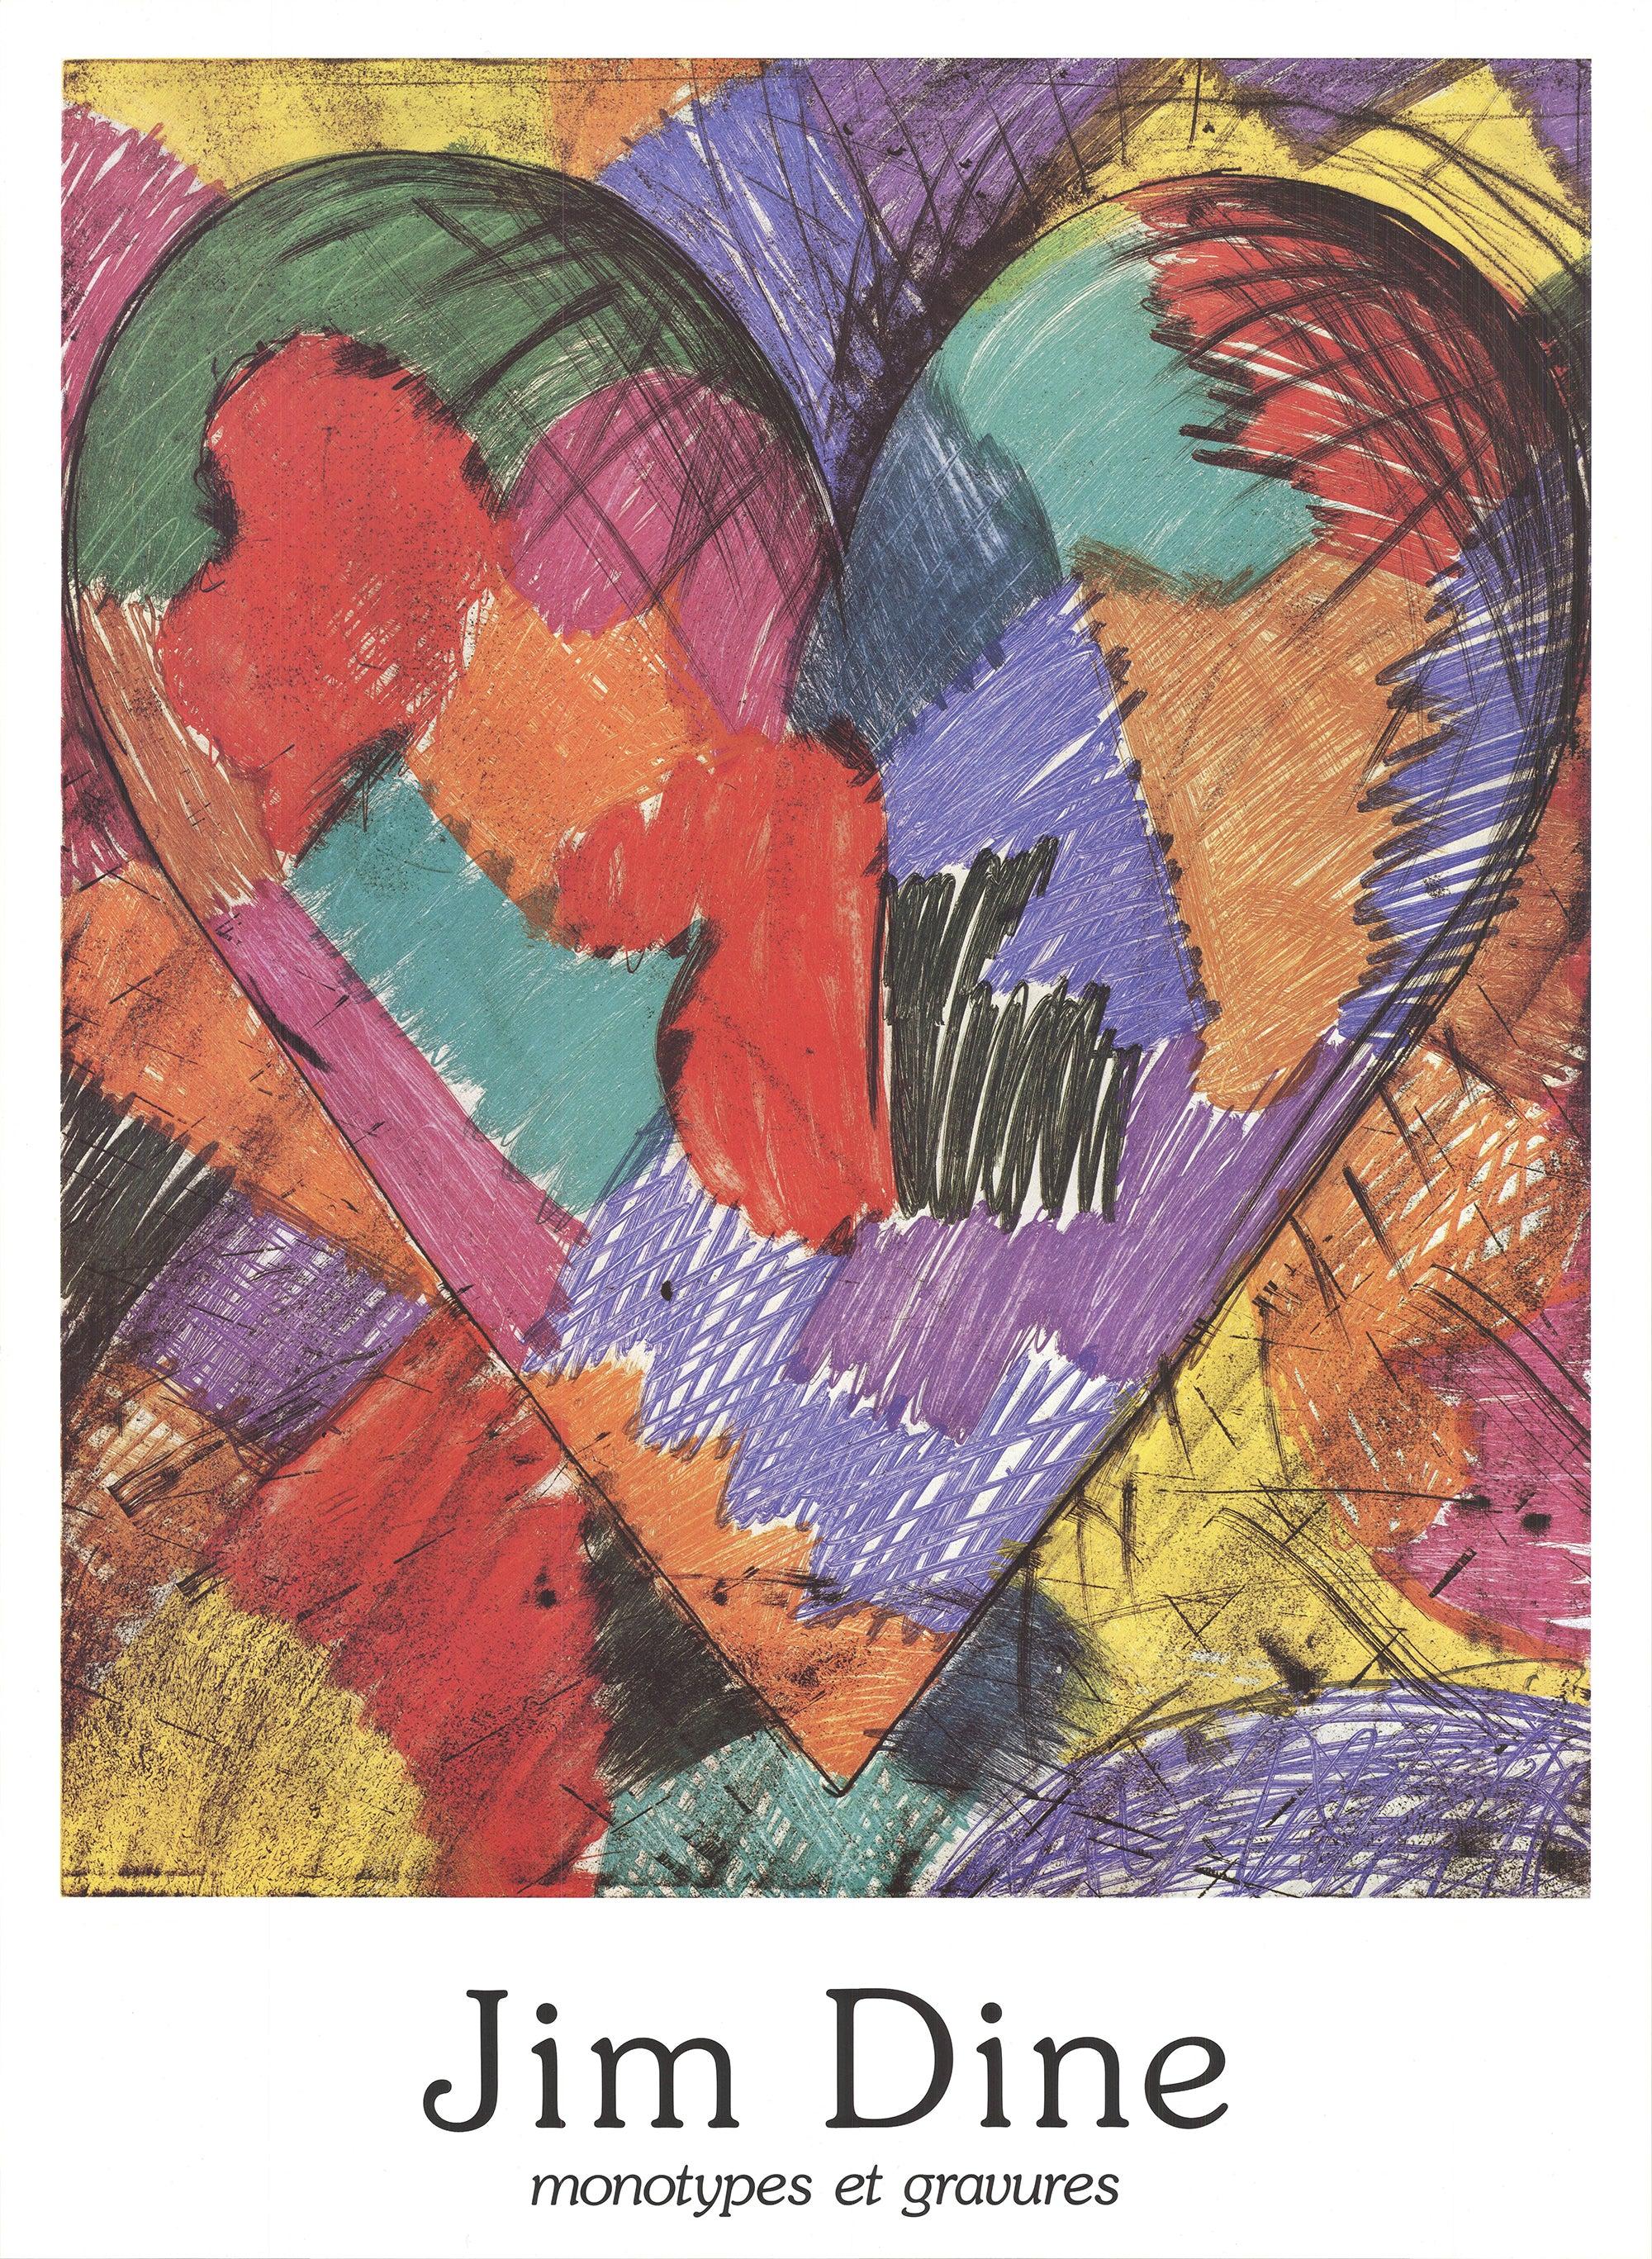 Colored Hearts by Jim Dine, Published by Galerie Maeght, France, 1984

In 1984, Galerie Maeght in France published a series of artworks by Jim Dine featuring colored hearts—a subject that holds deep symbolic meaning in Dine's oeuvre.

Jim Dine's